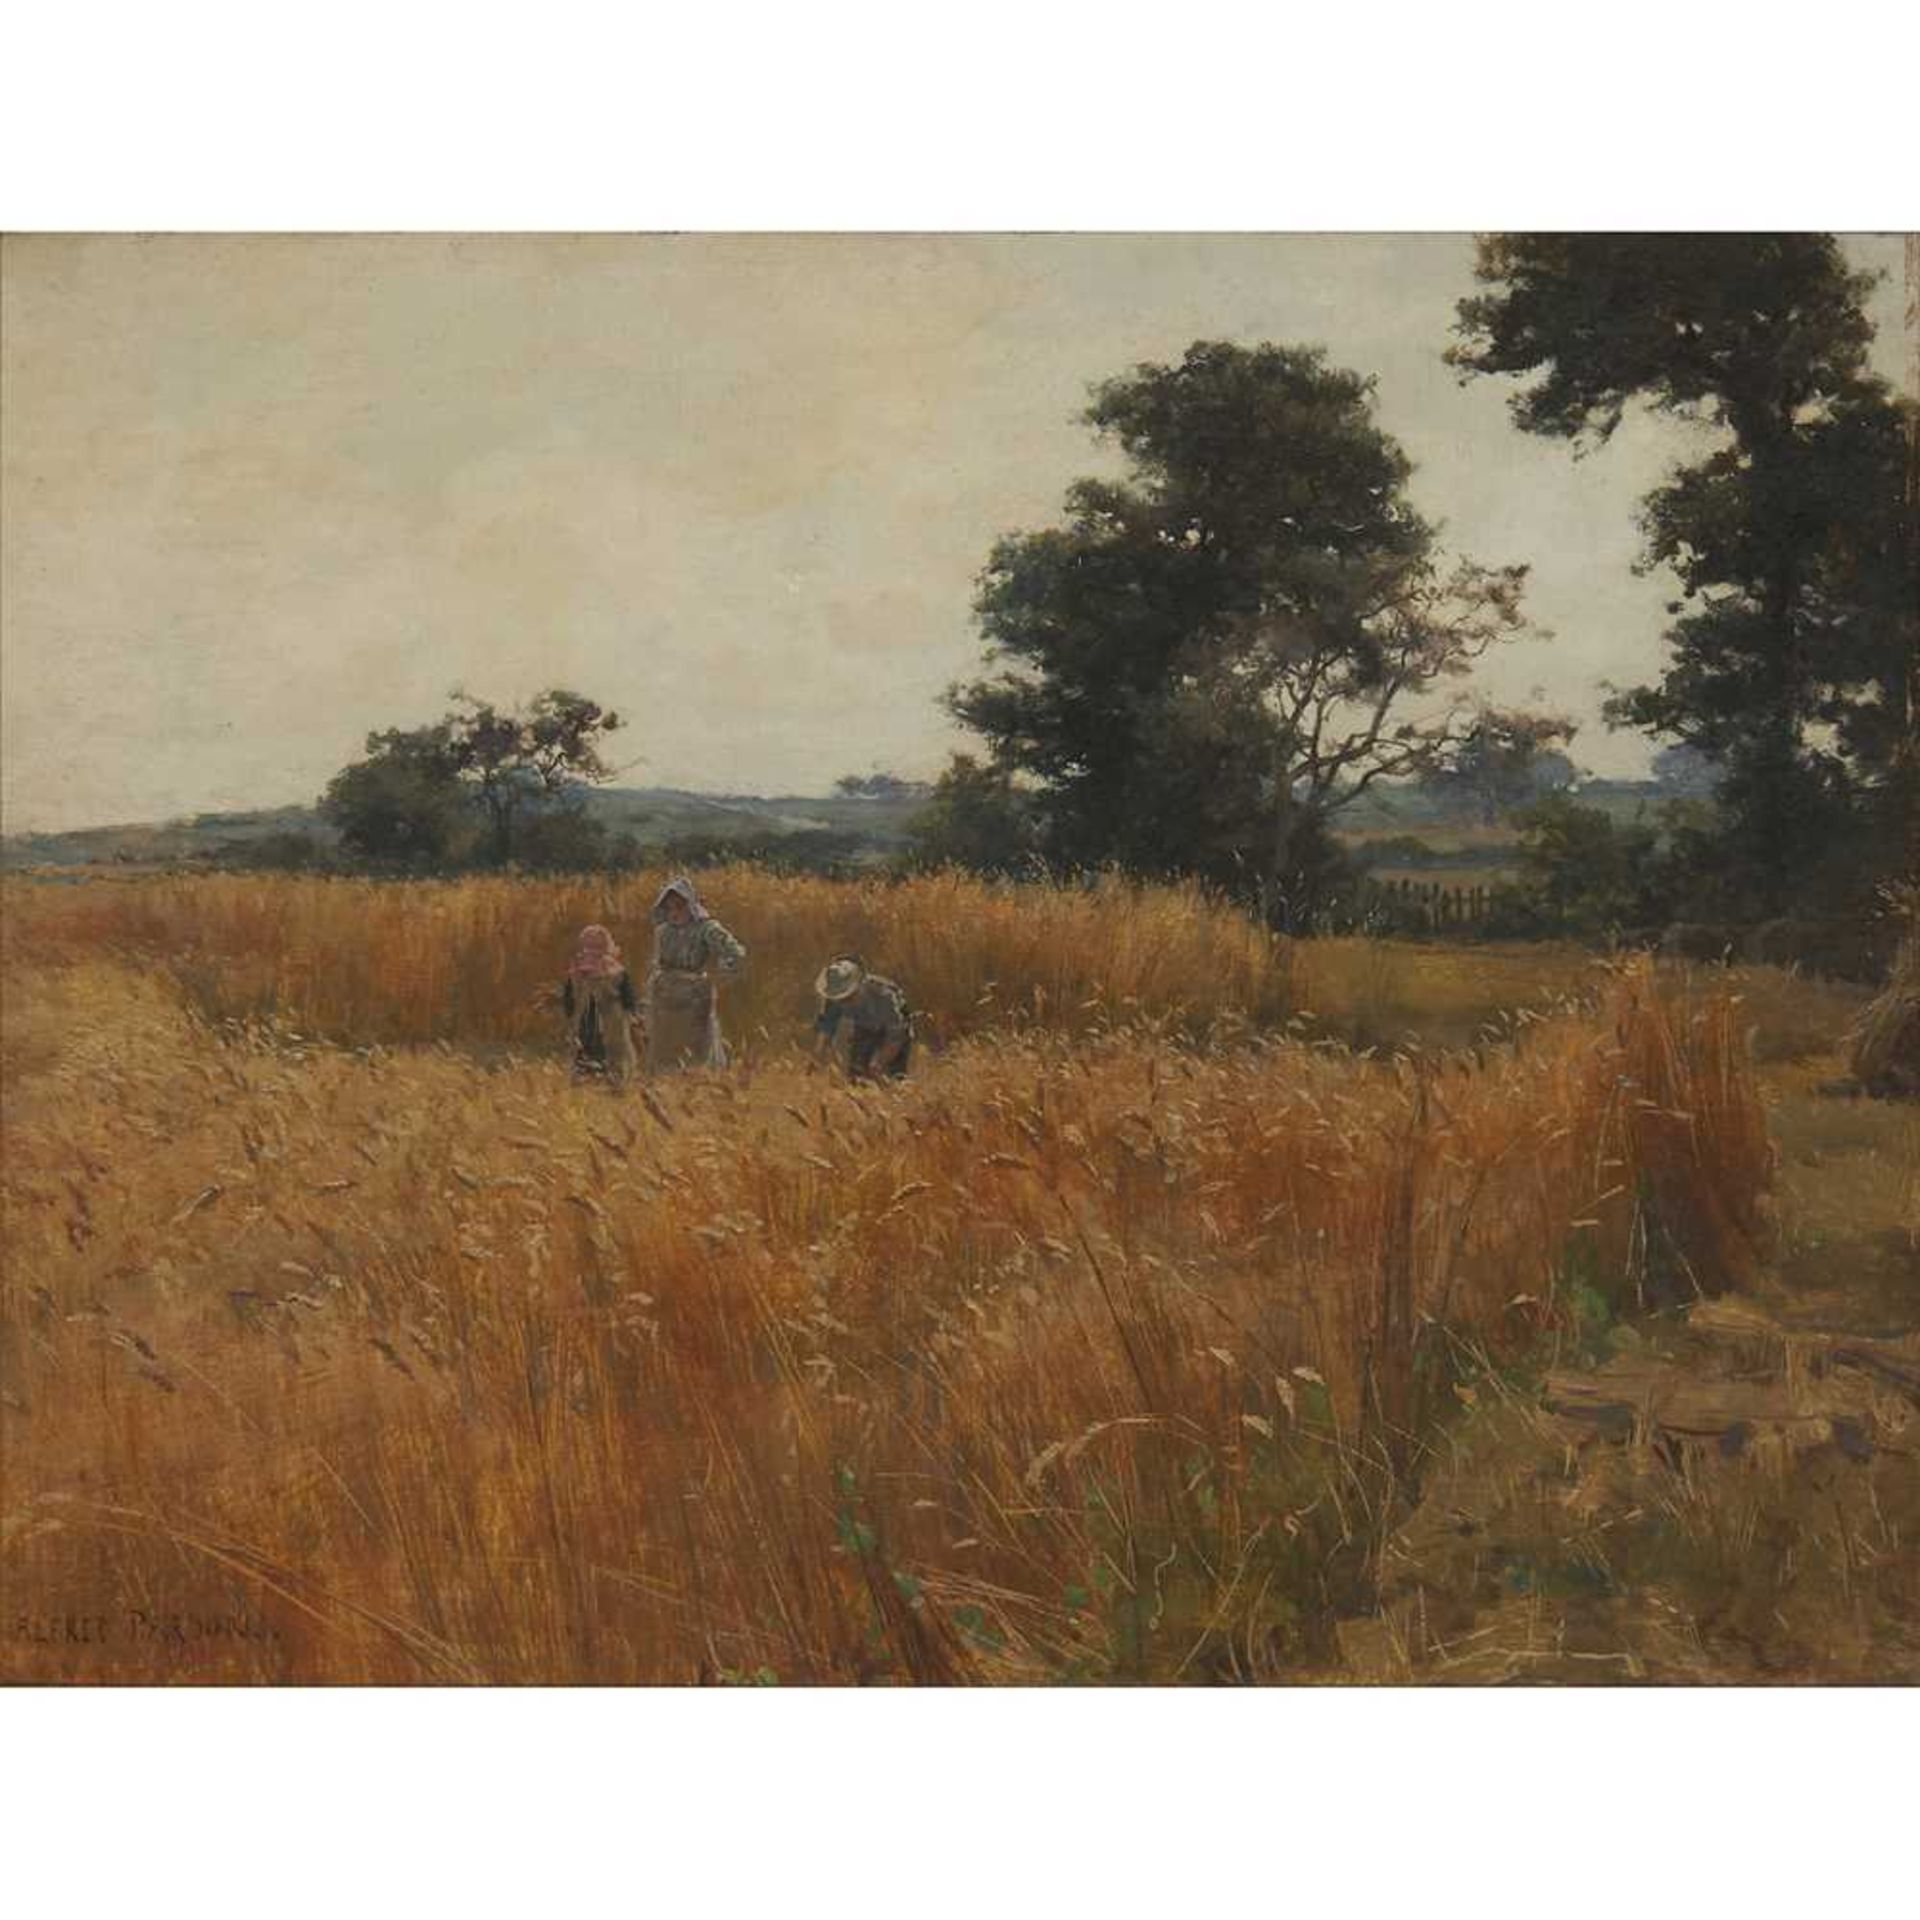 ALFRED WILLIAM PARSONS A.R.A. (BRITISH 1847-1920) HARVEST TIME